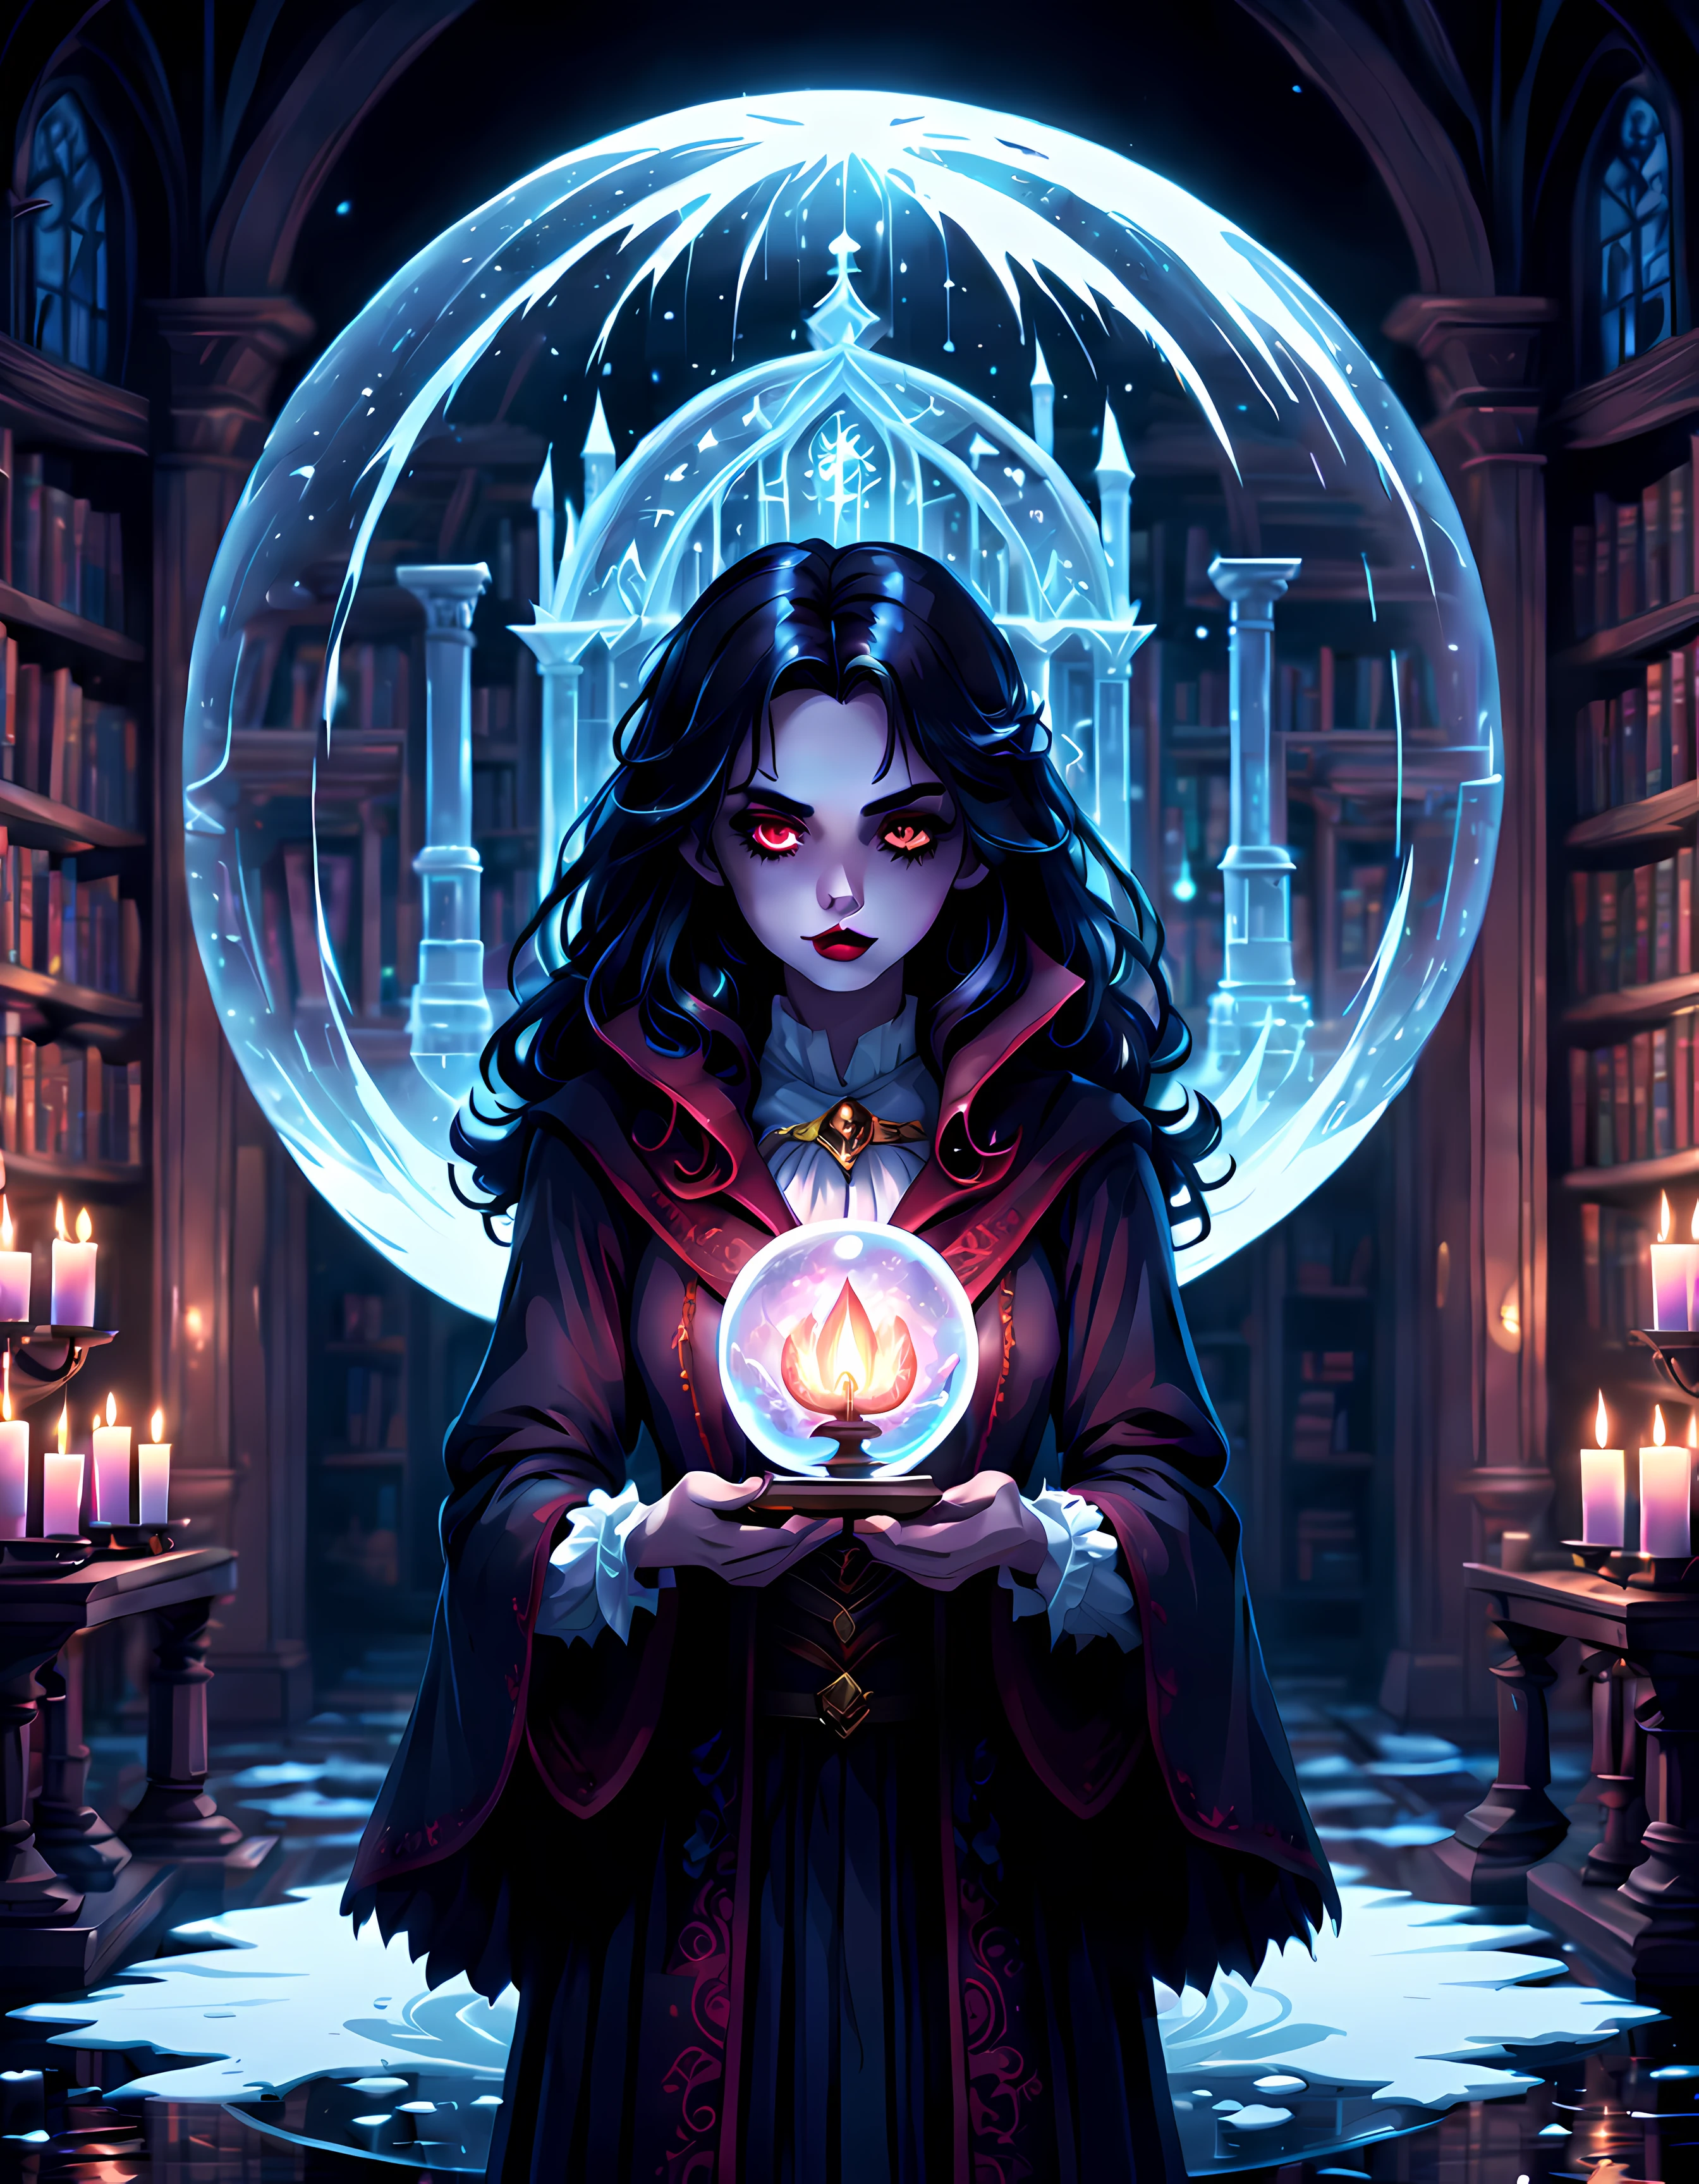 (Pixel Art:1.5), (獨自的:1.3), A (stunning vAmpire girl) ((((holding A mAgicAl AcAdemy inside An icy sphere))))), (((concentrAted look))), ((weAring A robe with rich gothic pAtterns)), (inside An old librAry dimly lit with cAndles), ((eerie cosmic portAl behind the girl)), (ethereAl shiny pArticles:1.2), pixel Art